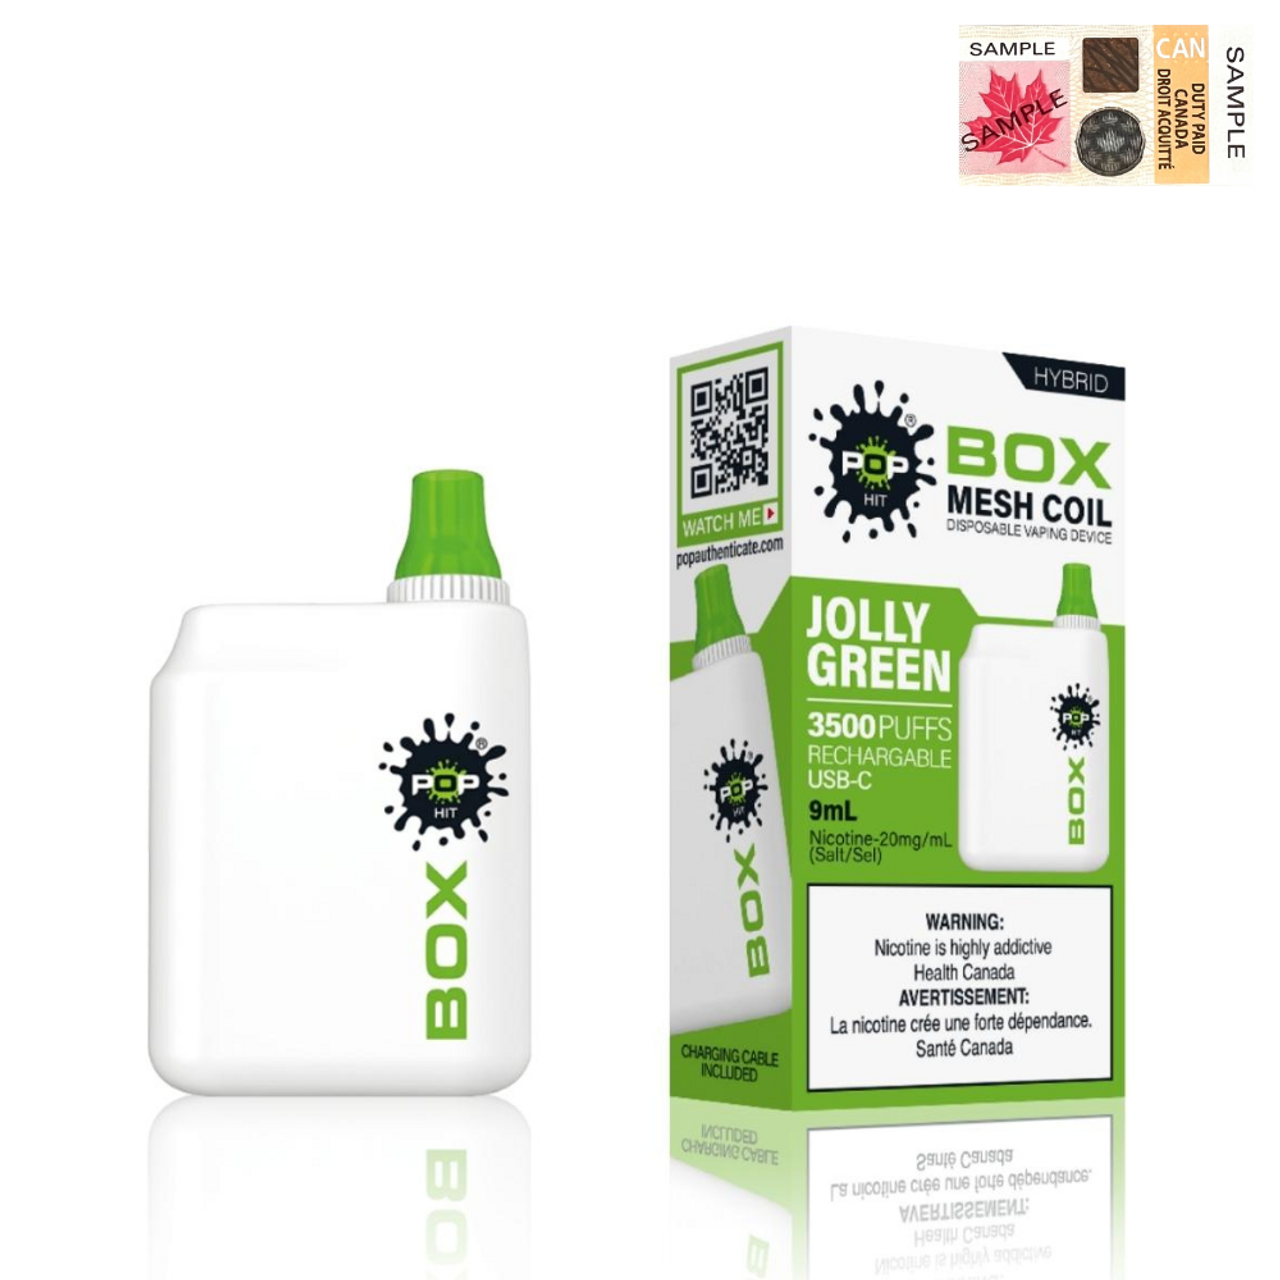 (Stamped) Jolly Green Pop Hybrid Box 3500 Puff Disposable Vape Device Display of 5